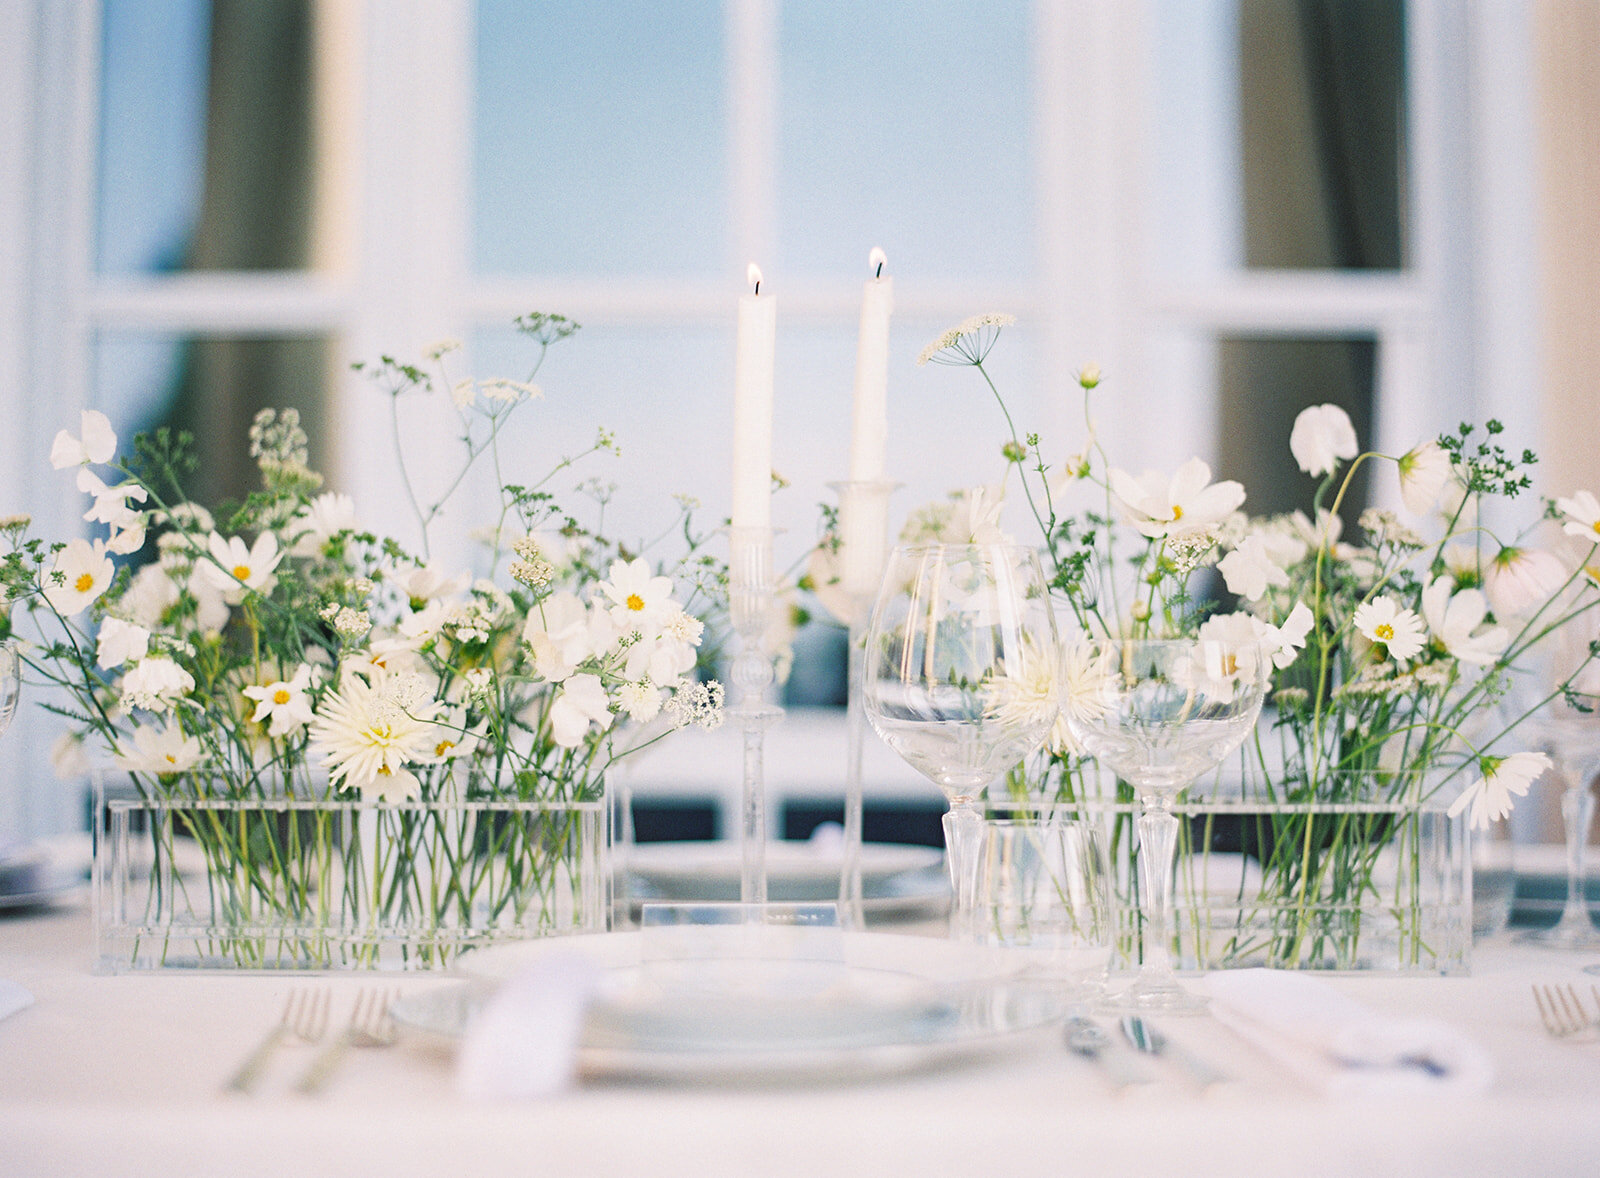 All white and green center pieces of reception table. Clear vases with individual floral stems through each opening in vase. Photographed by Amy Mulder Photography